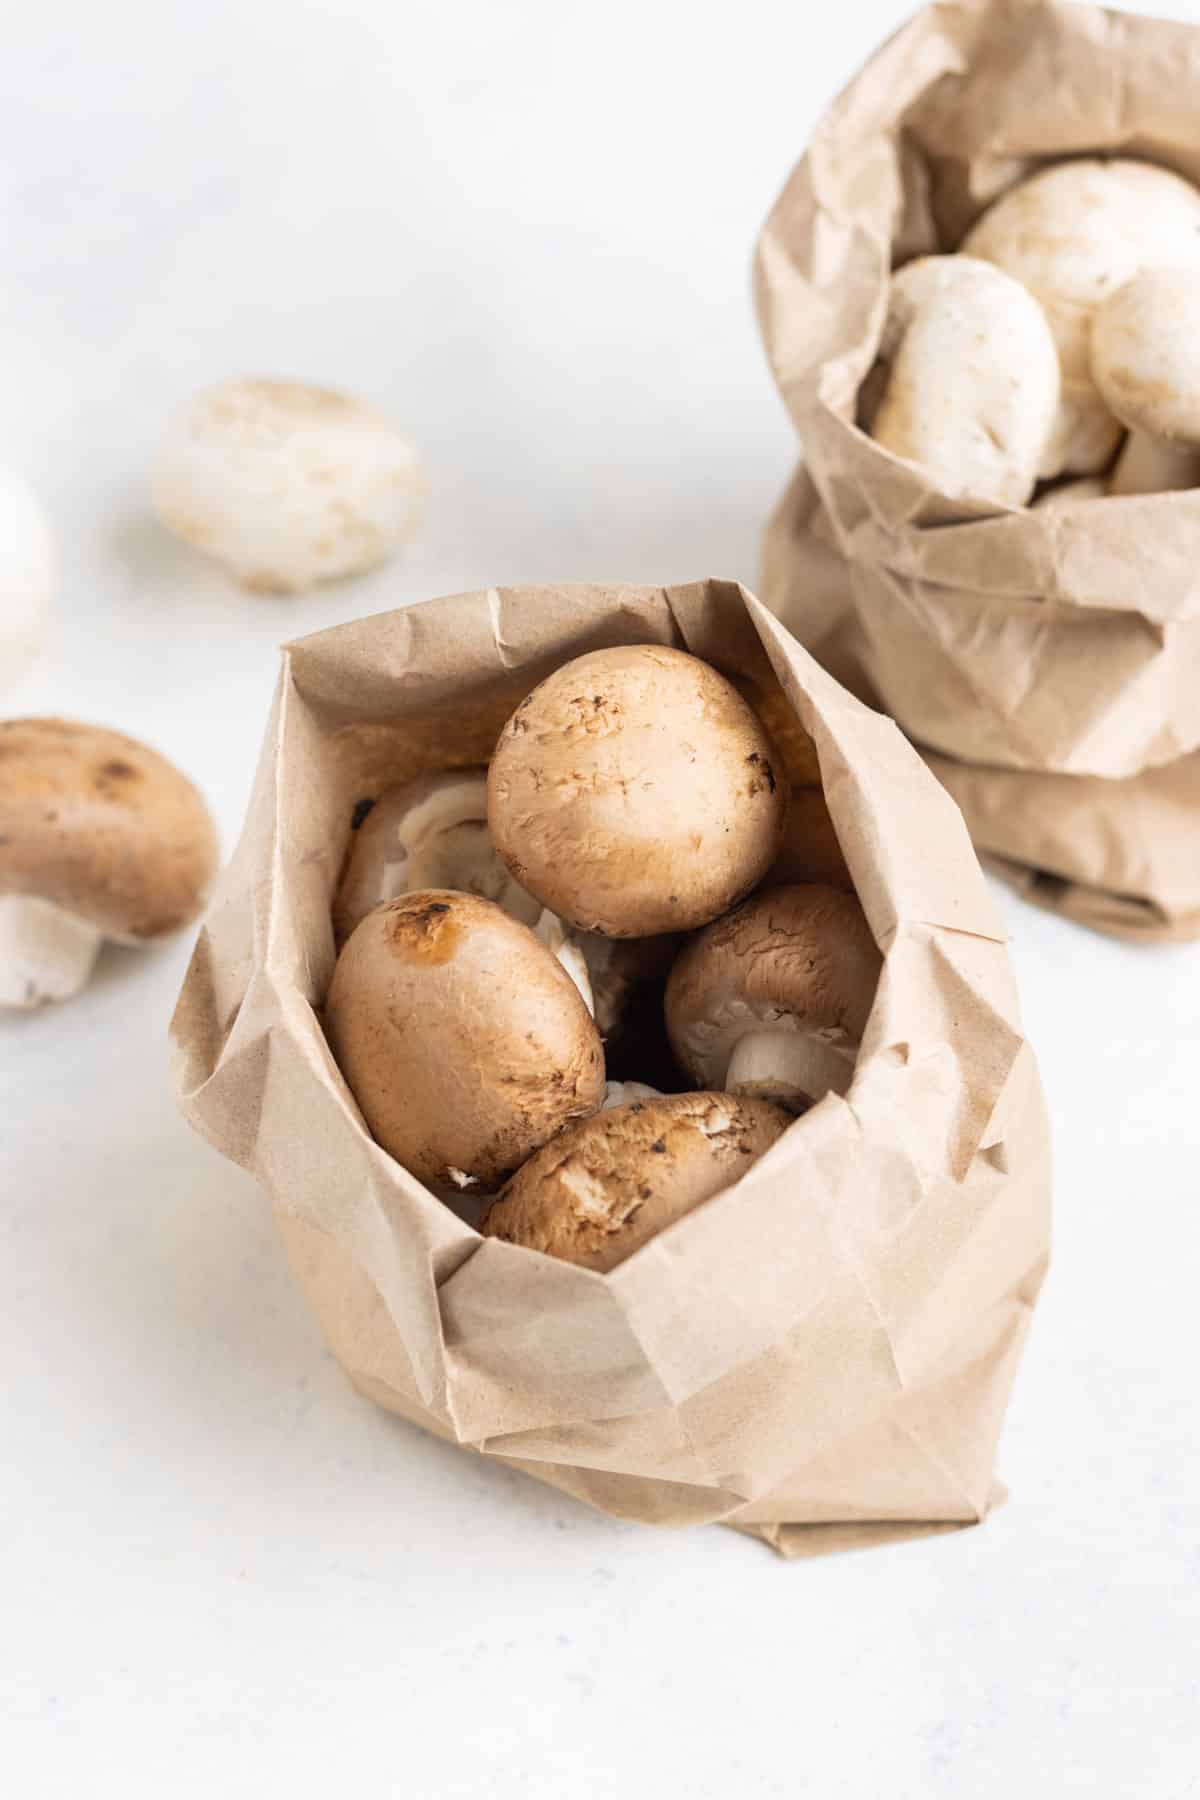 A brown paper bag of whole mushrooms on the countertop.